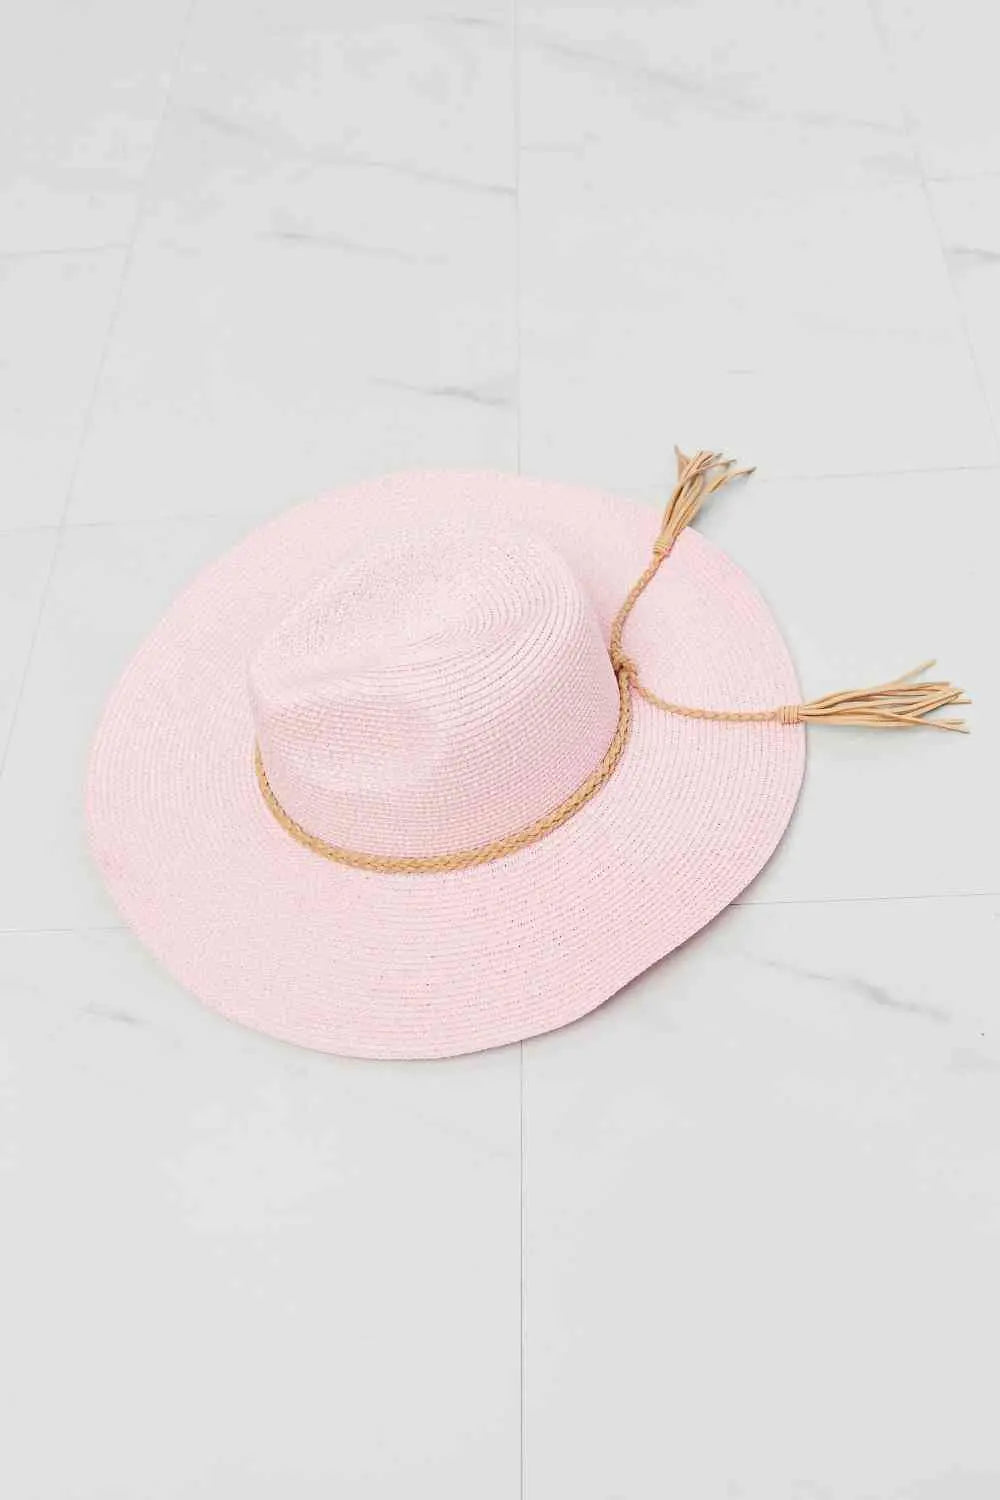 Fame Route To Paradise Straw Hat - Scarlett's Riverside Boutique